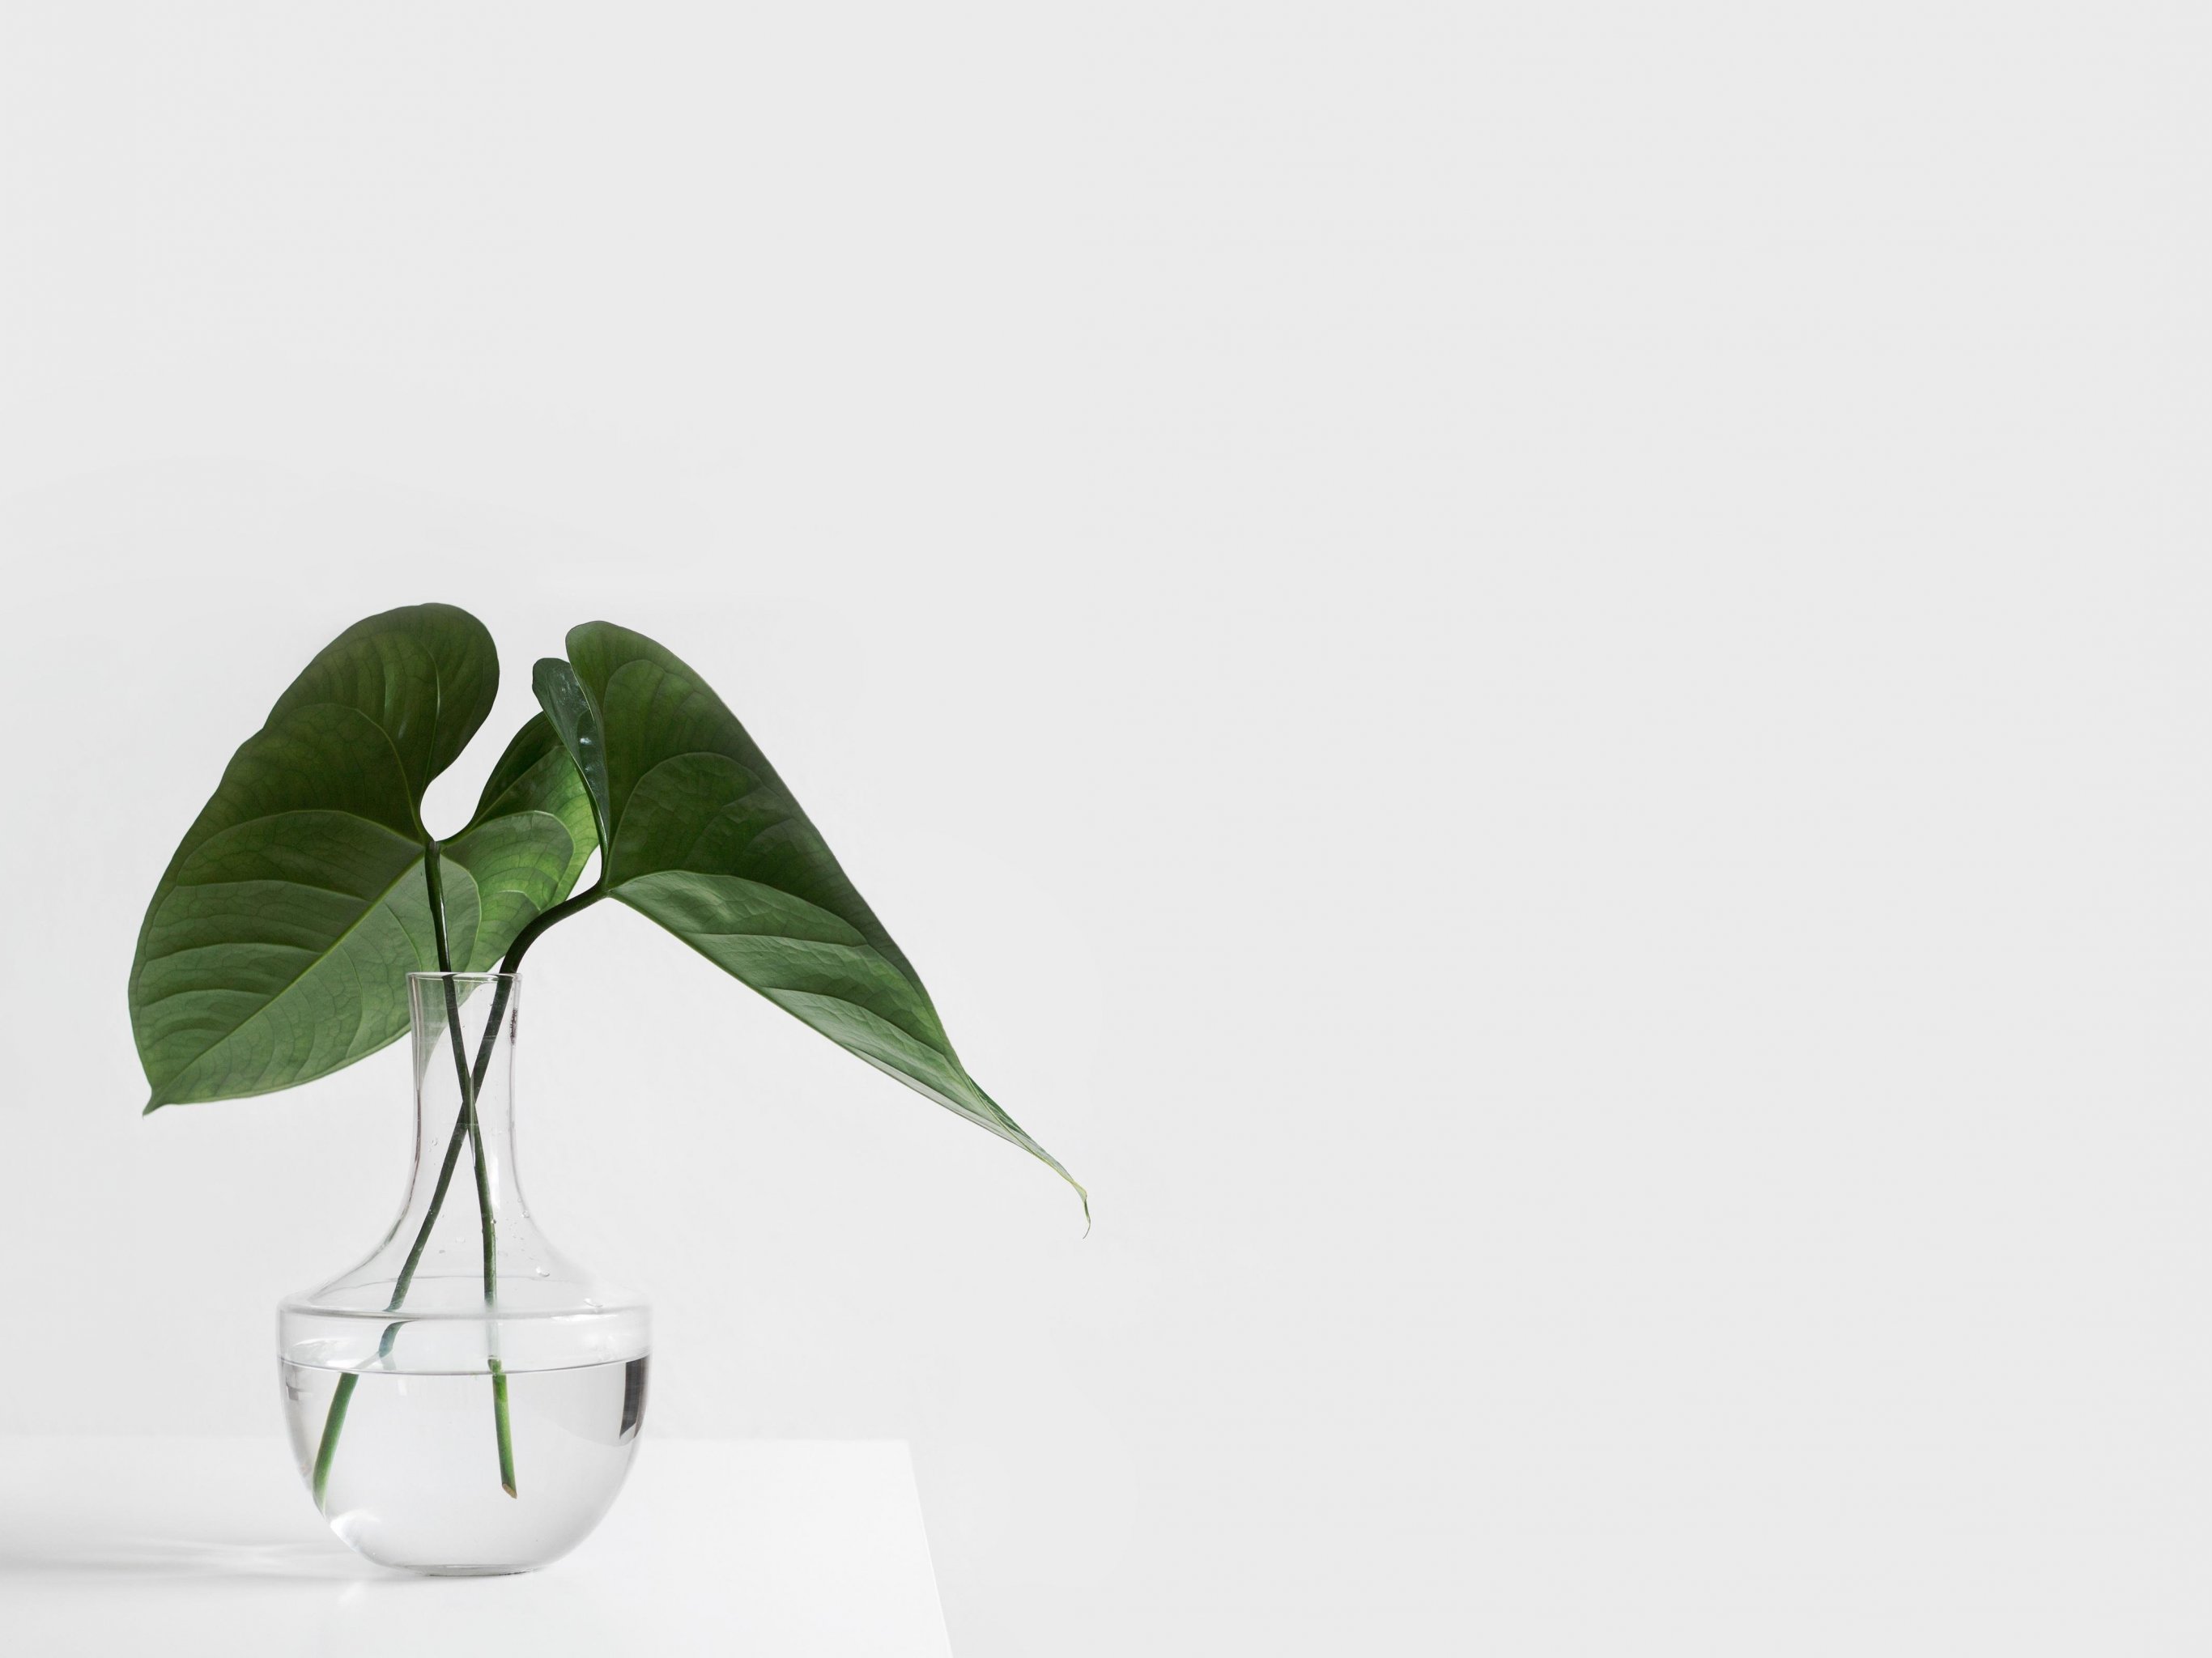 Minimalist Aesthetic Plant in Clear Vase Wallpaper - iPhone, Android &  Desktop Backgrounds